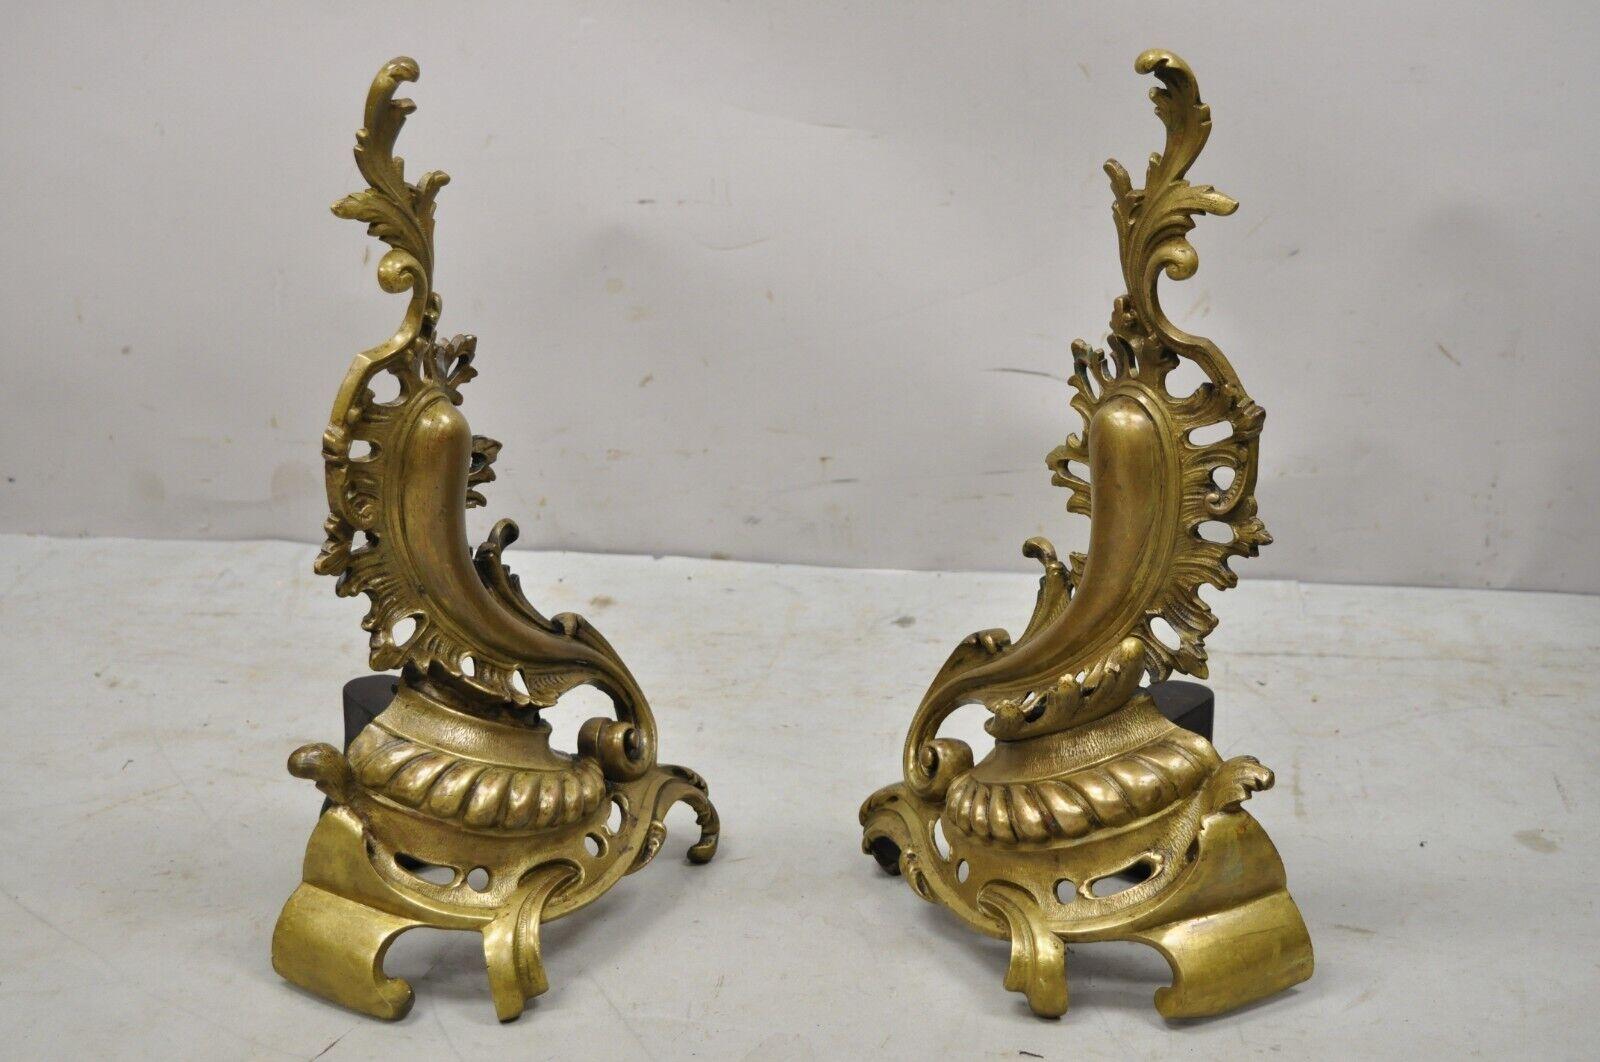 Vintage French Rococo style bronze Acanthus Leafy Scroll Andirons - a pair. Circa mid-20th century. Measurements: 18